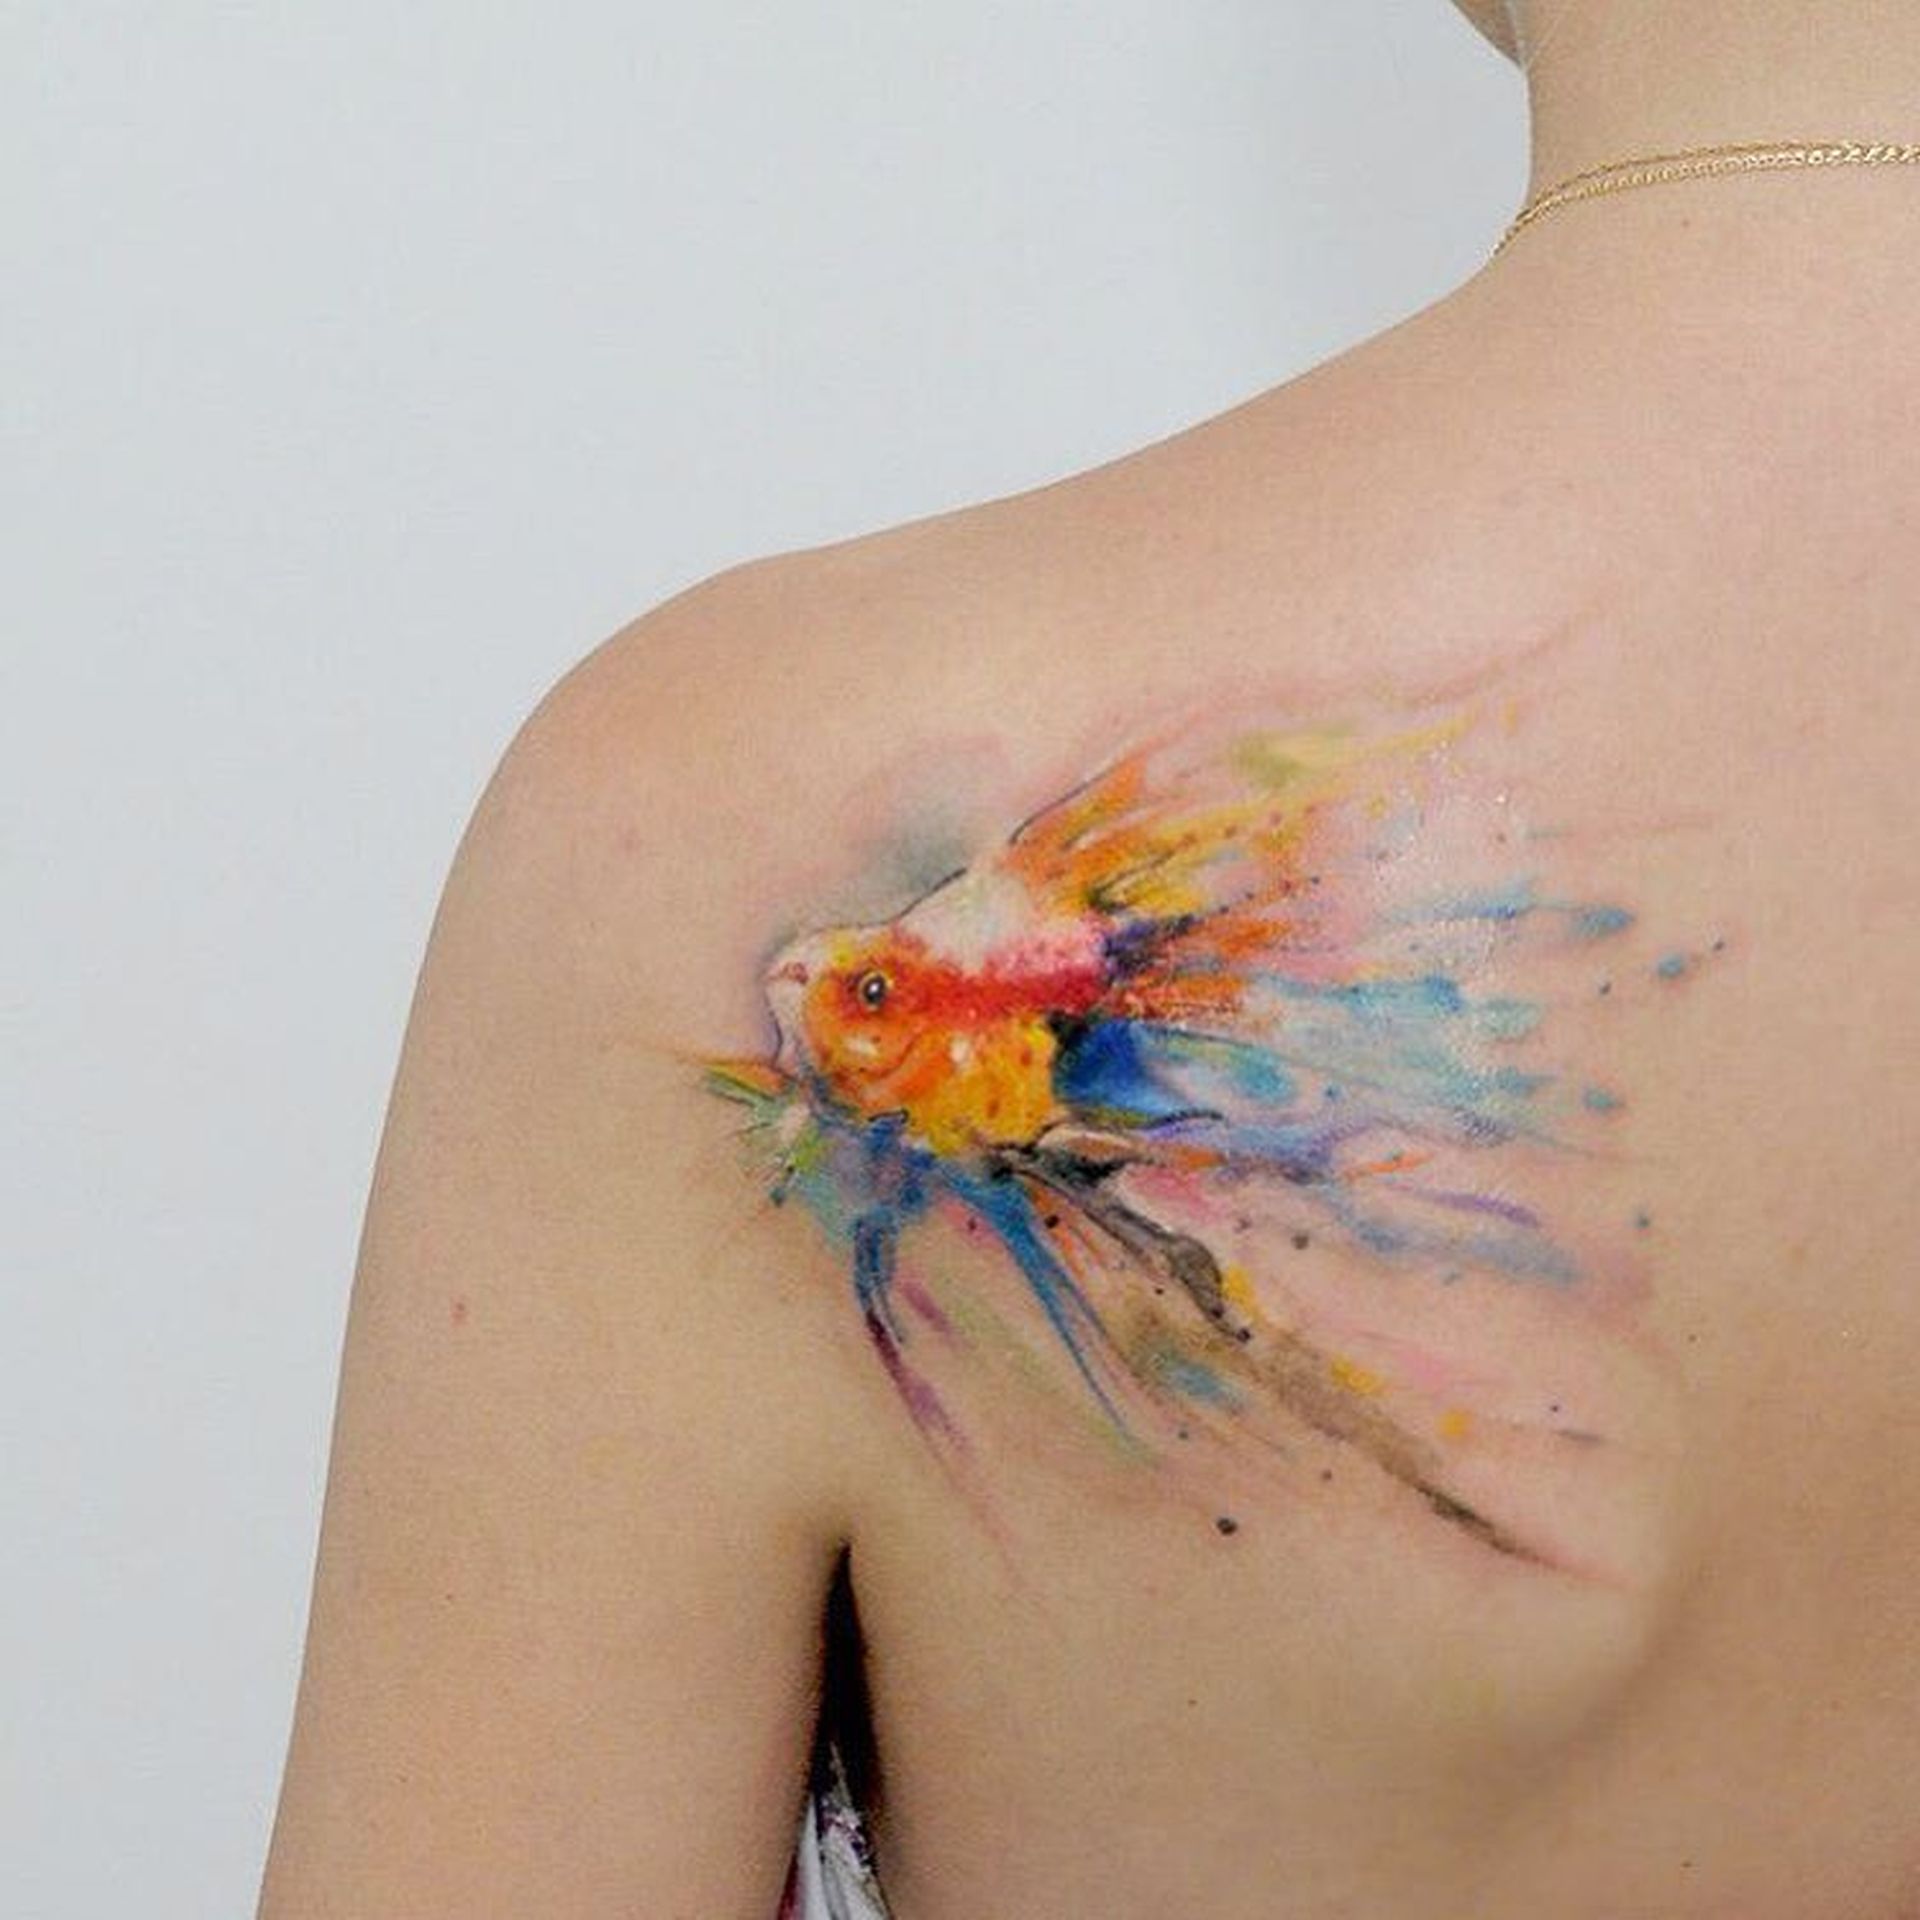 watercolor styled tattoo art